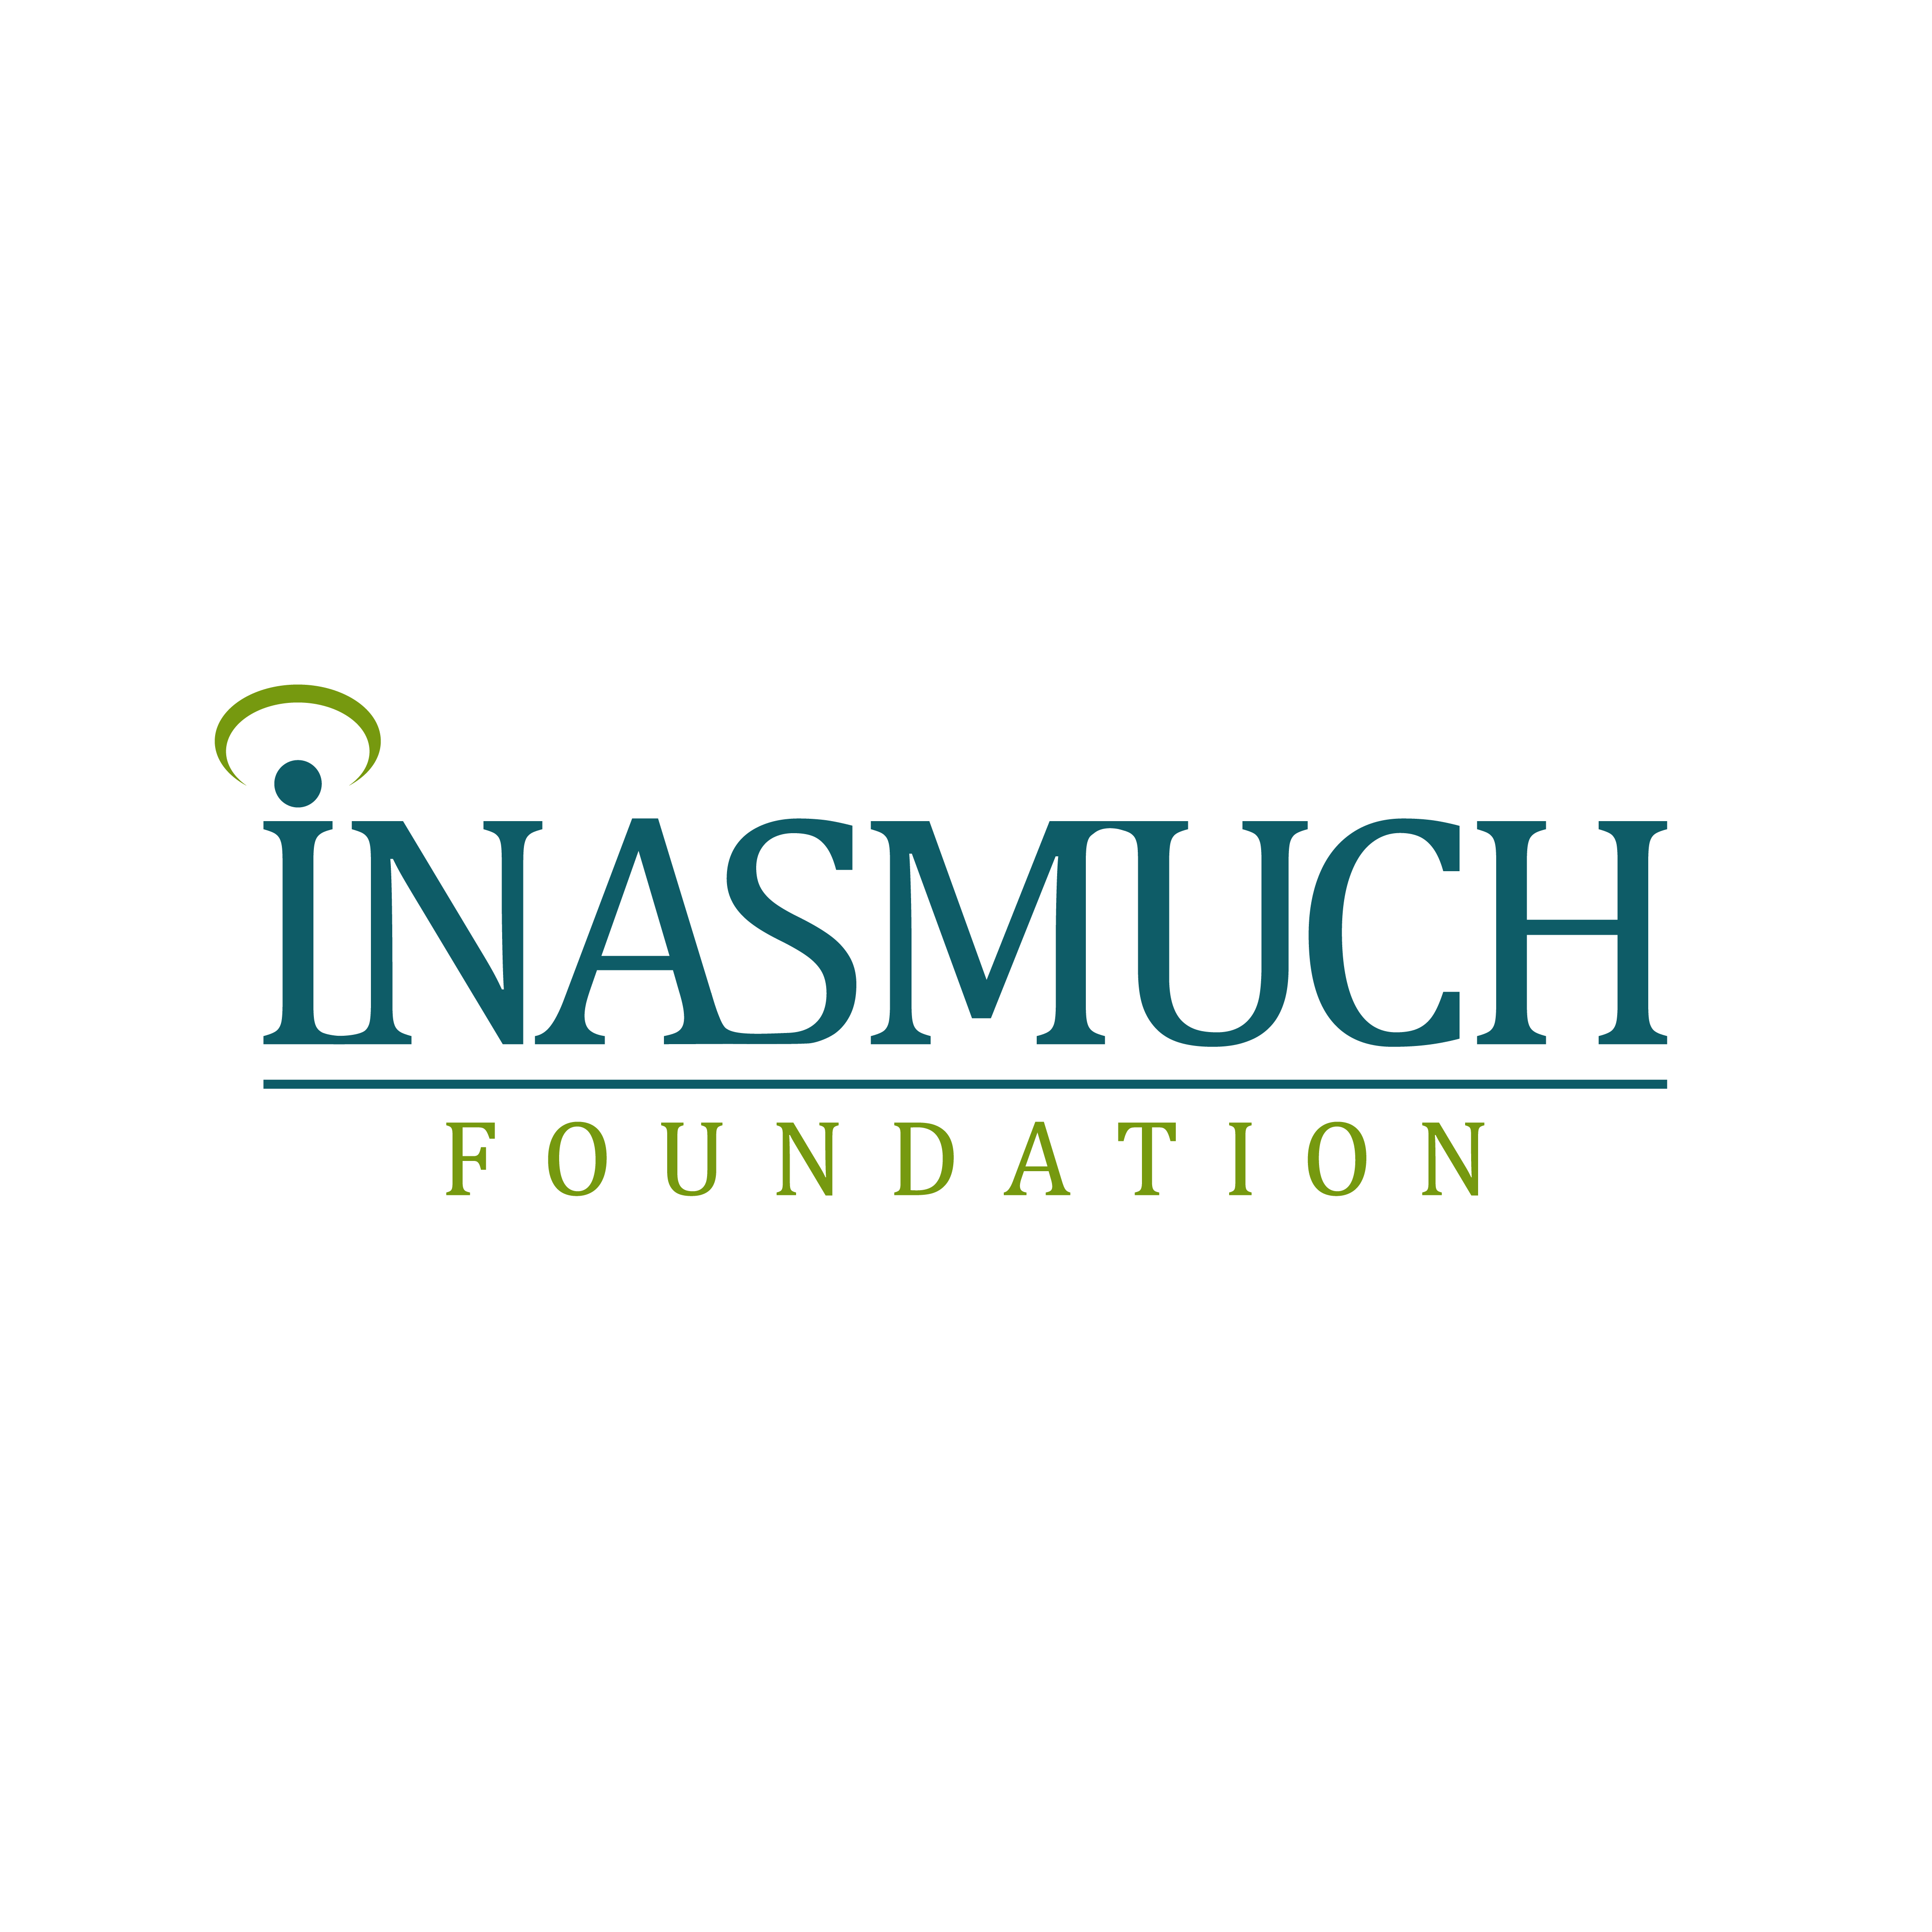 Inasmuch Foundation Commits $3 Million Toward Student Success and Well-Being